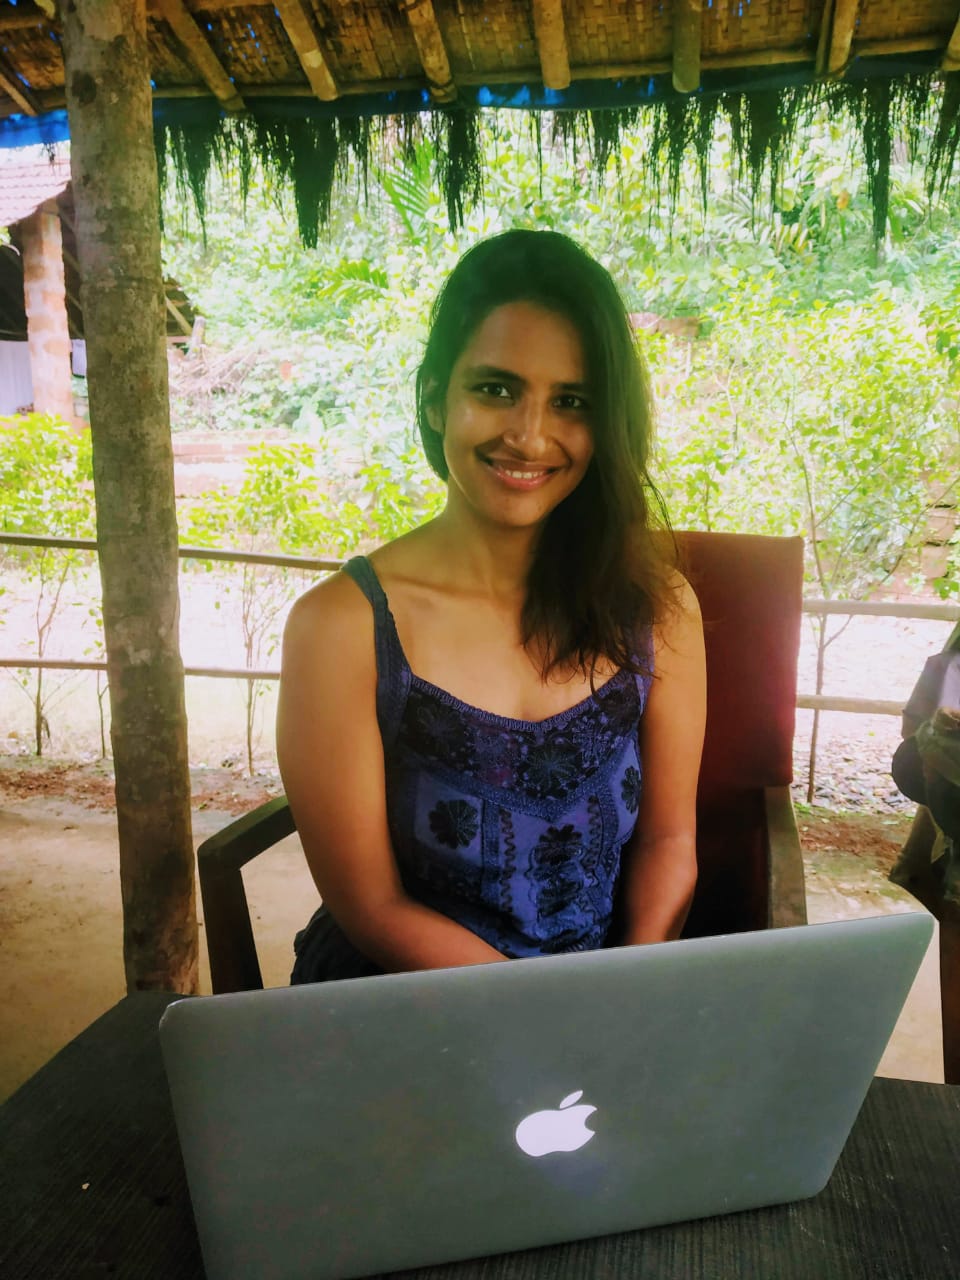 Samriddhi Malhotra is now based in Goa where she volunteers at an animal rescue centre